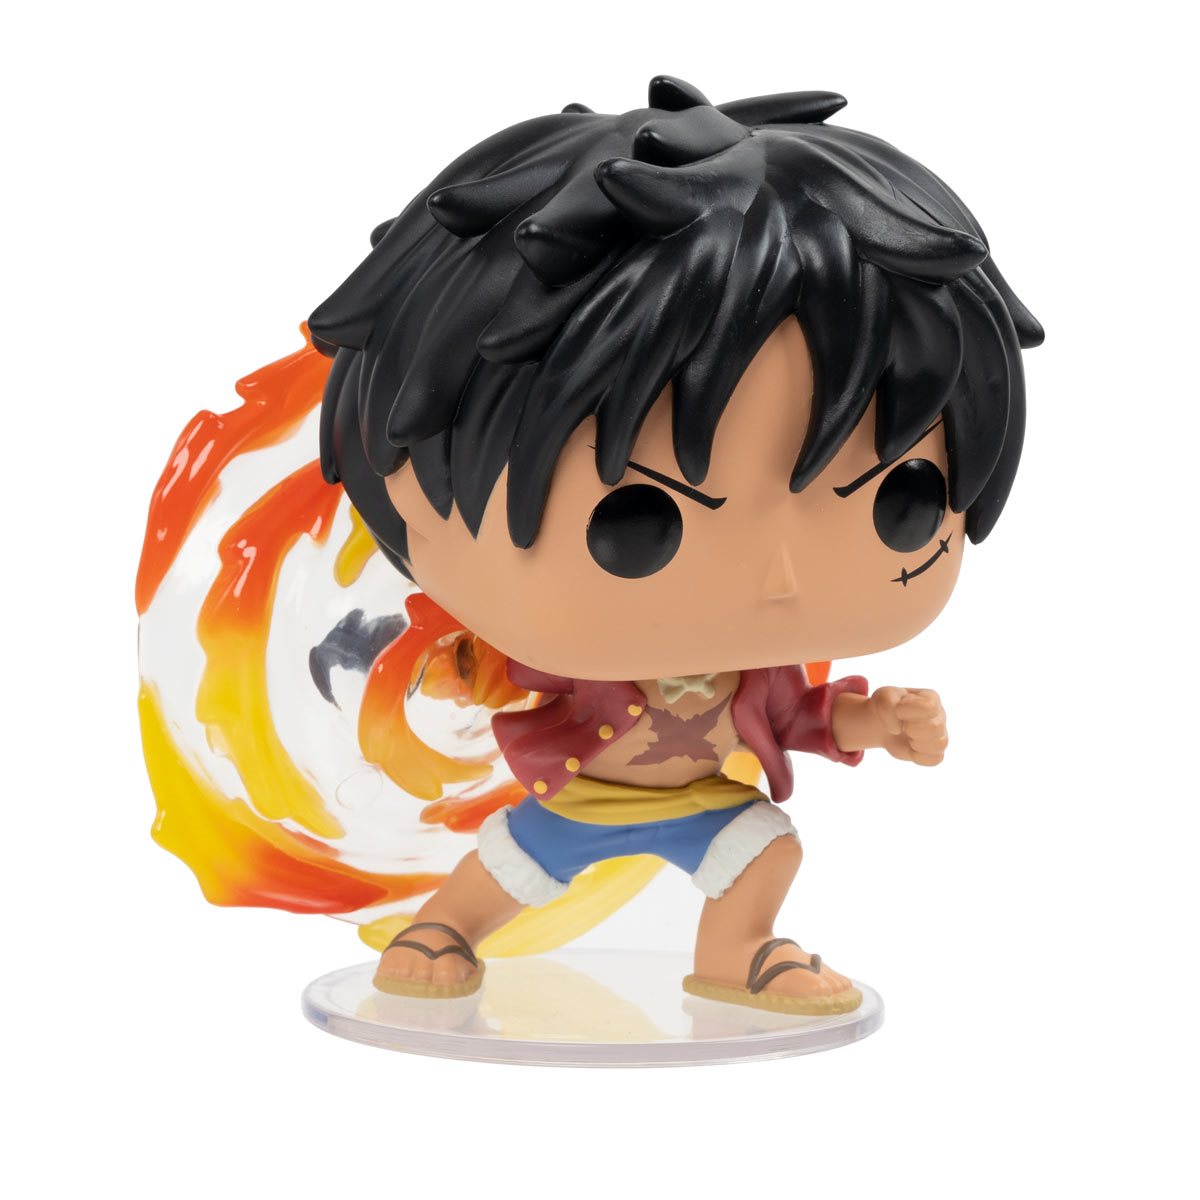 Red Hawk Luffy 1273 (AAA Anime Exclusive - One Piece) Funko Pop